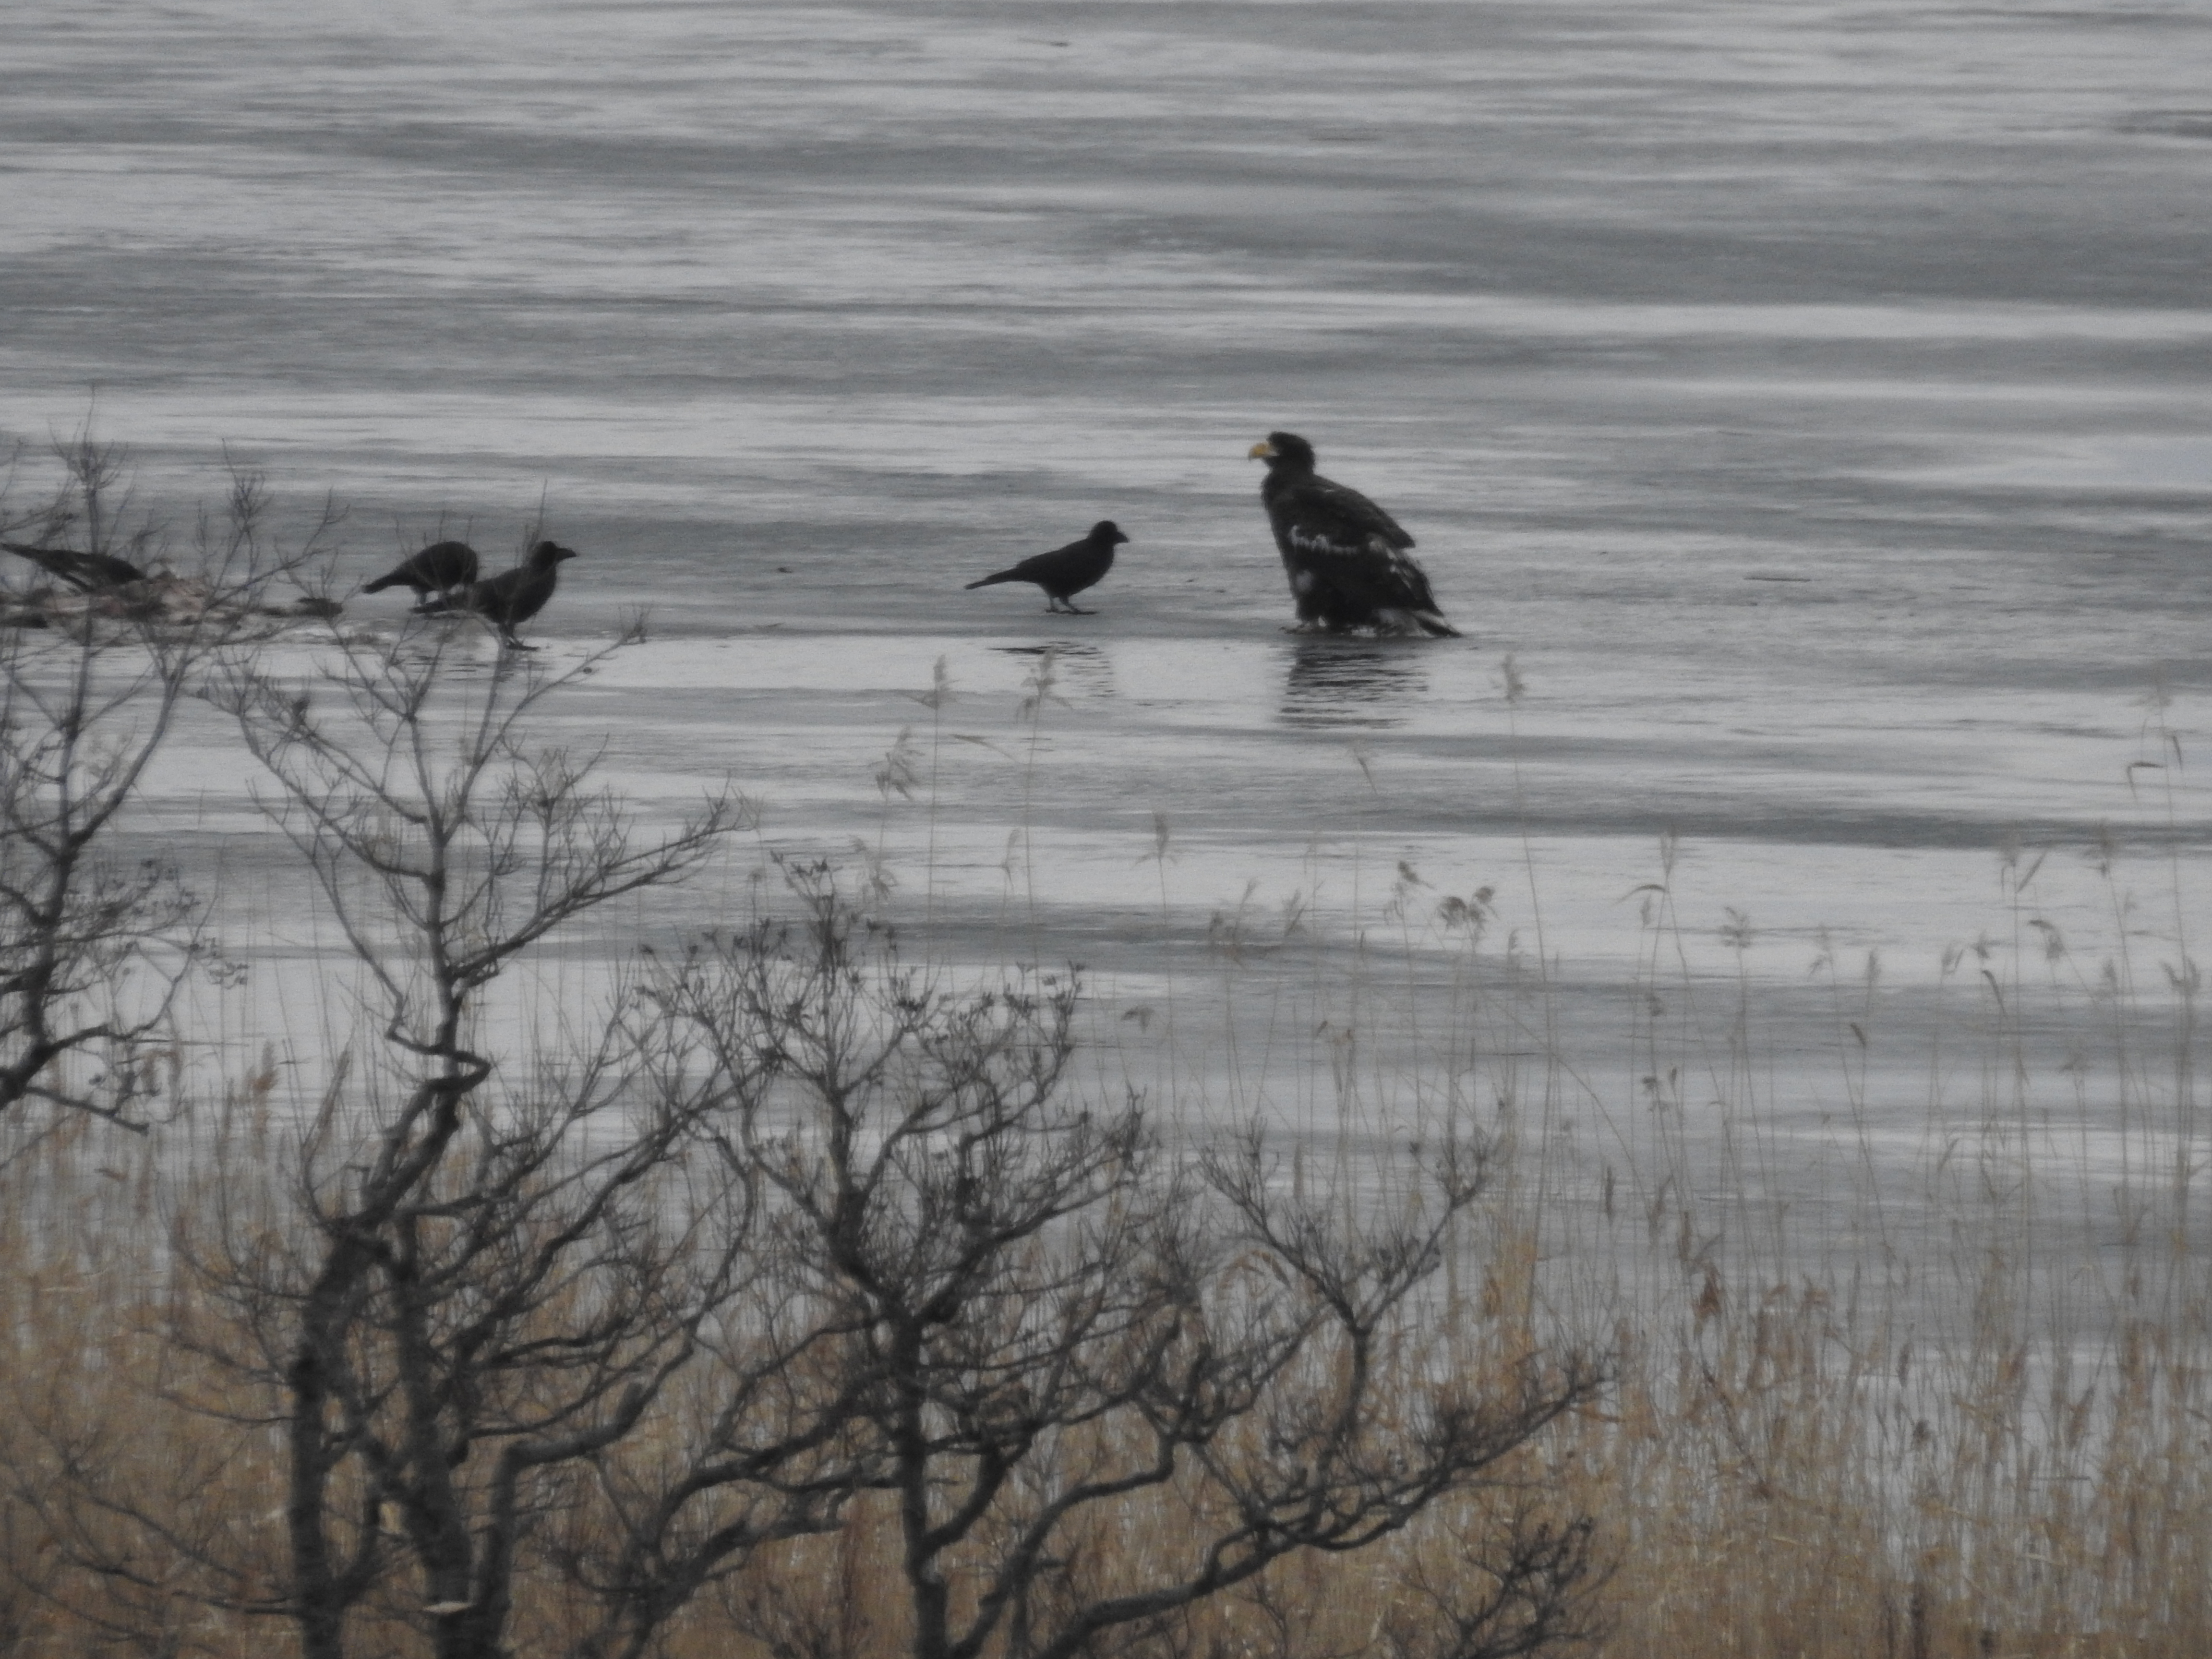 20191218_Akkeshi Waterfowl Observation Centre_Stellar Sea Eagle with crows (2)